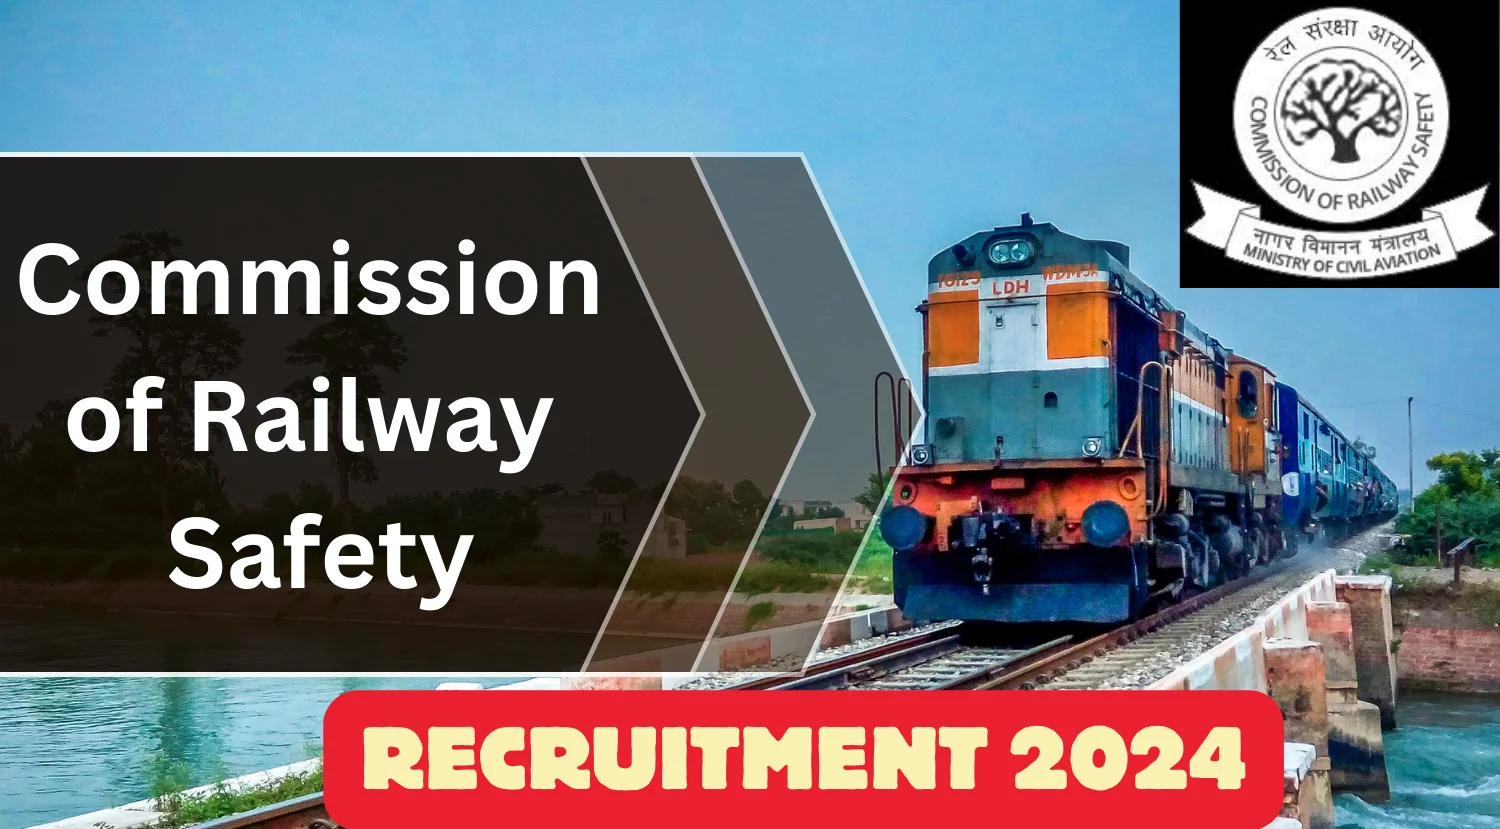 Commission of Railway Safety Recruitment 2024